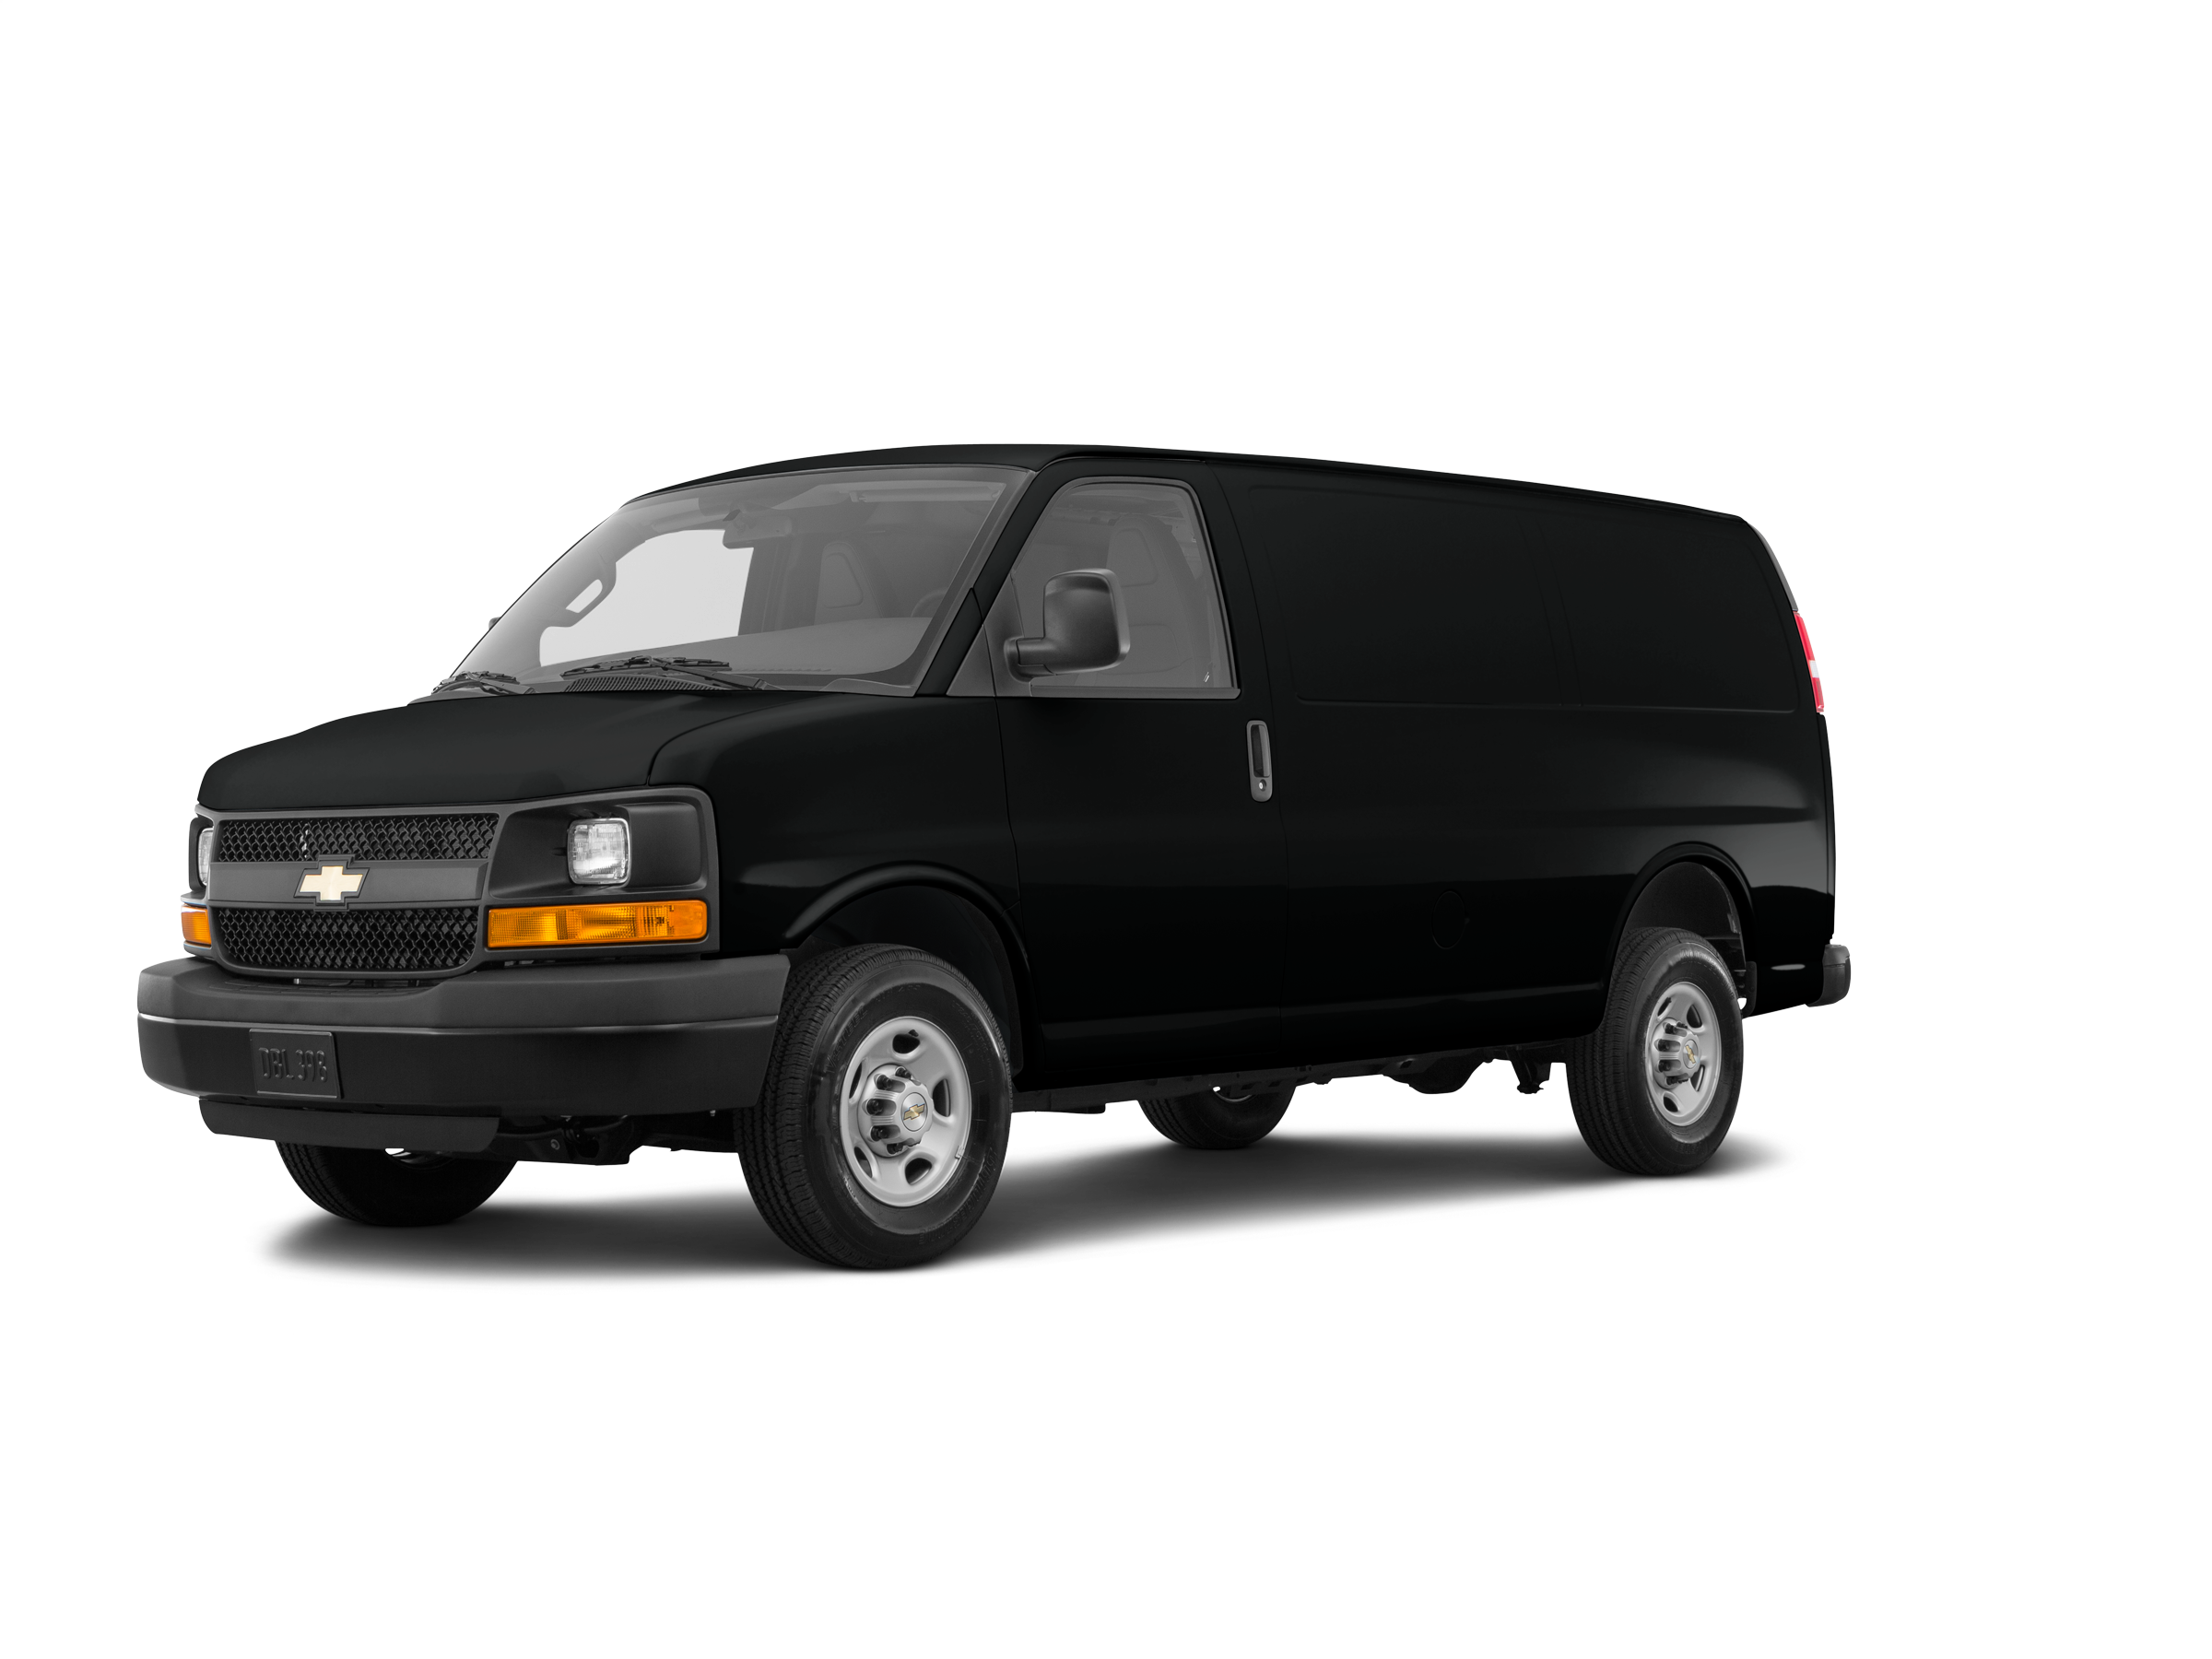 2017 Chevy Express 3500 Cargo Price, Value, Ratings  Reviews Kelley Blue  Book